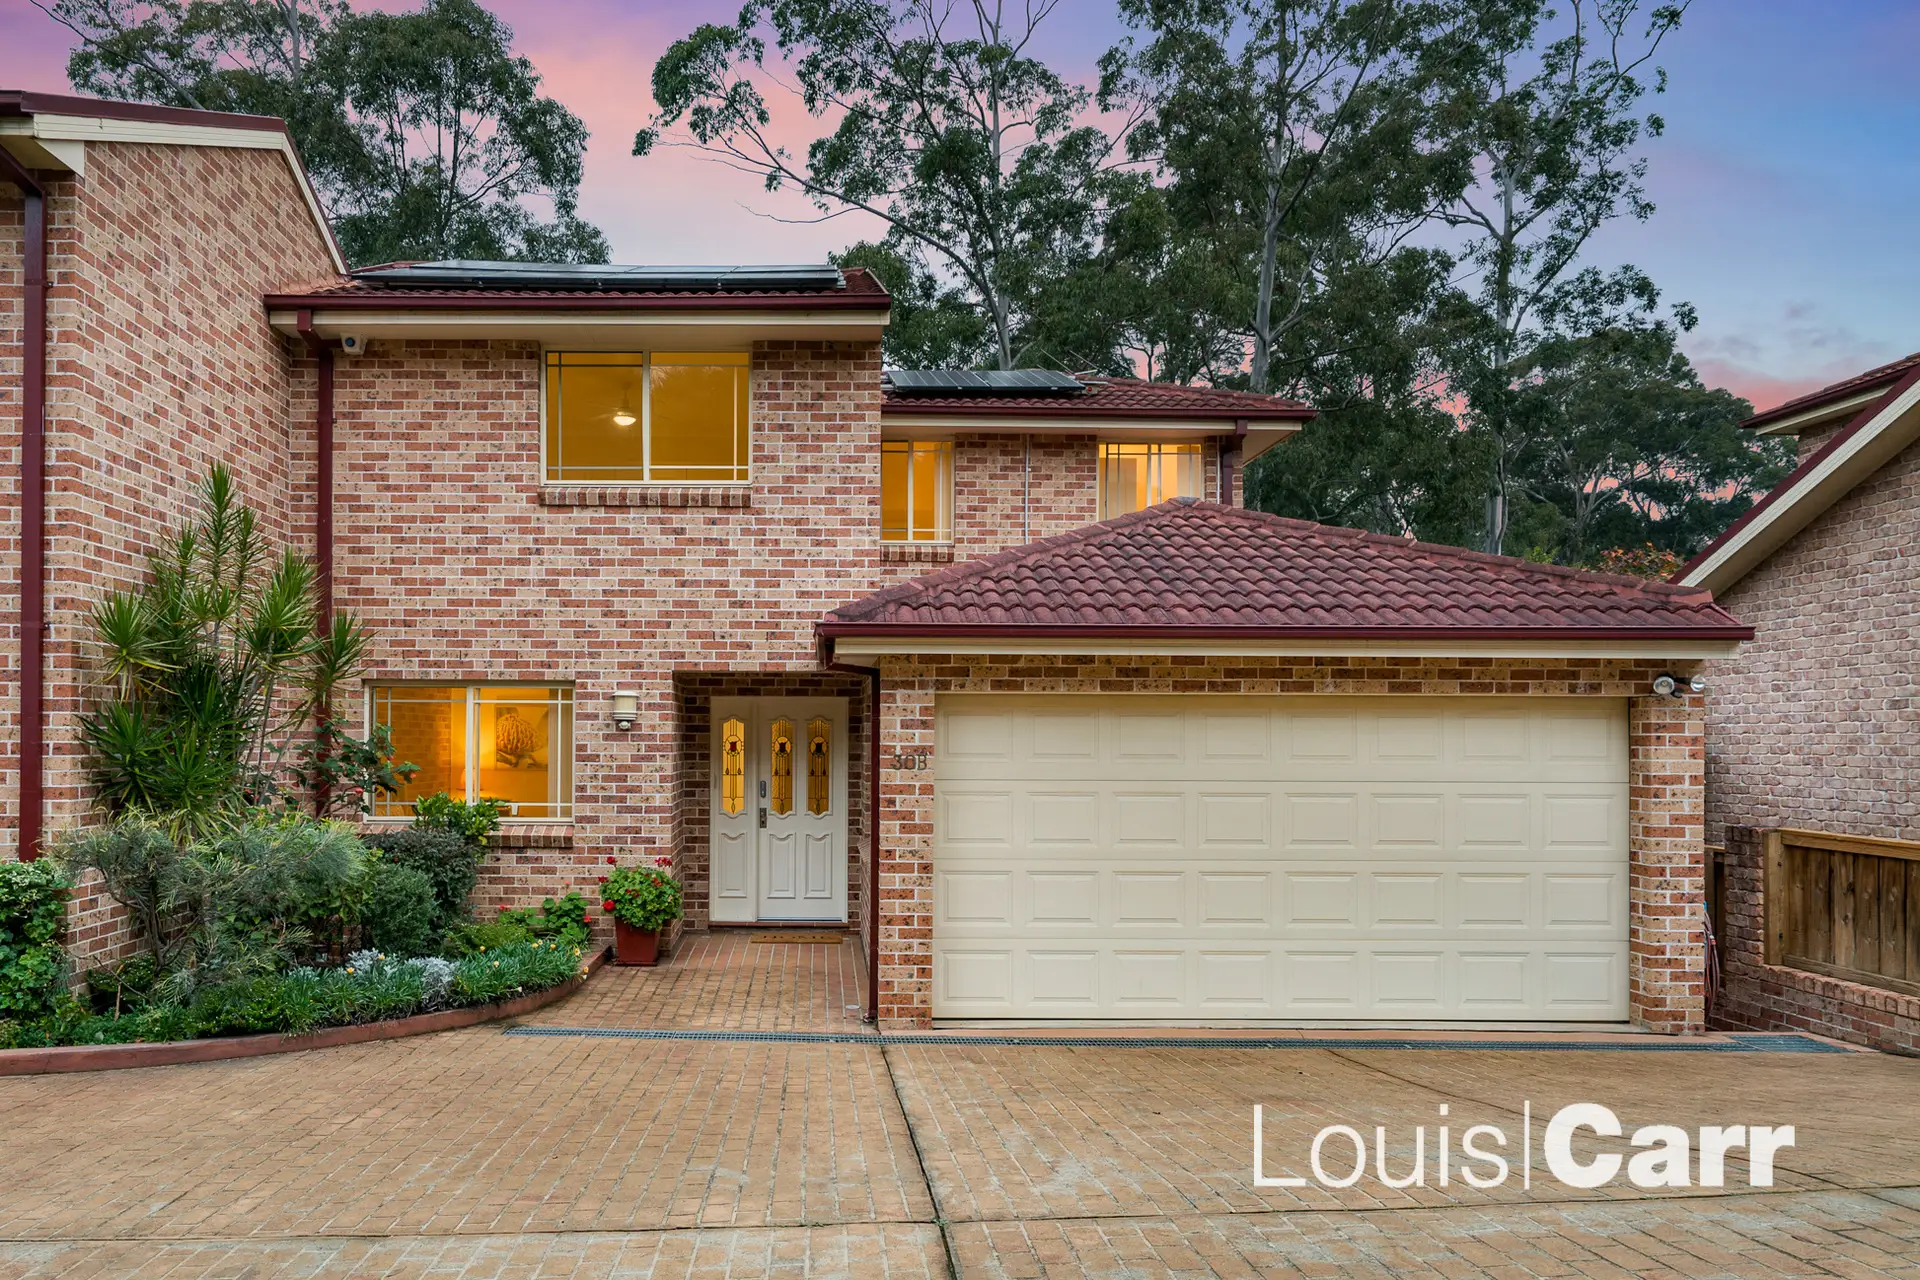 Photo #1: 30B Alana Drive, West Pennant Hills - Sold by Louis Carr Real Estate